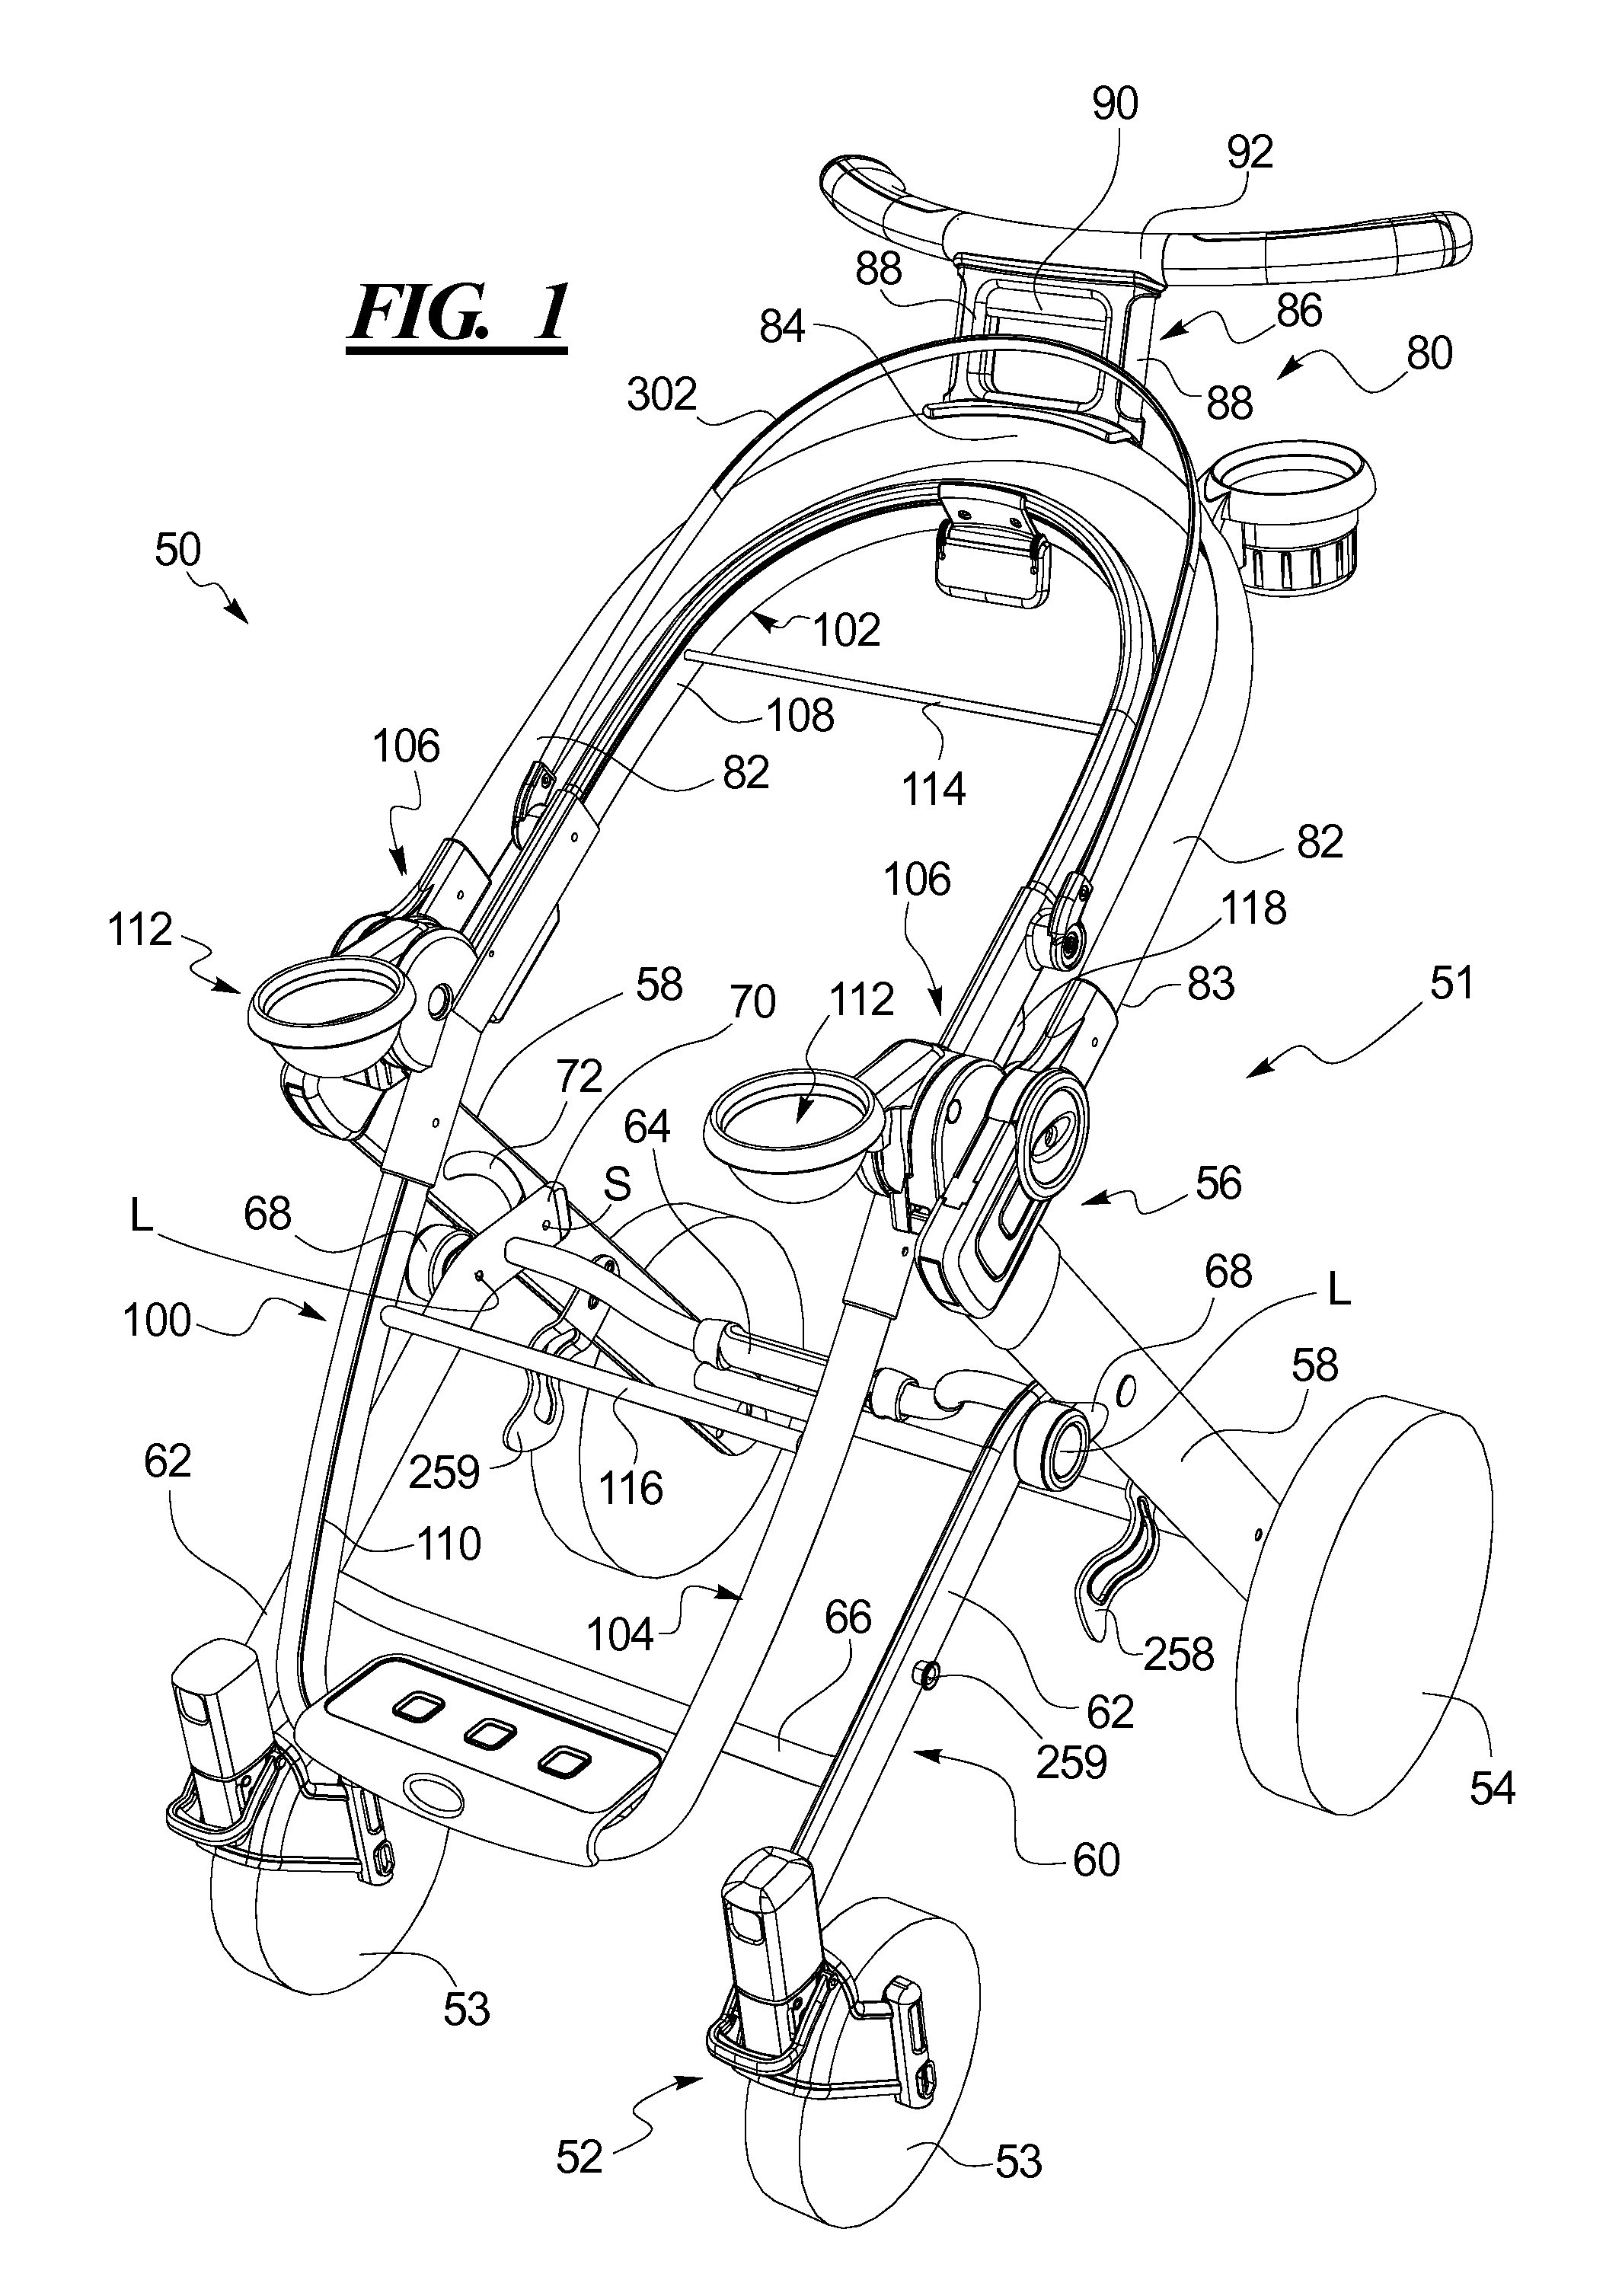 Foldable Stroller and Fold Linkage for Same